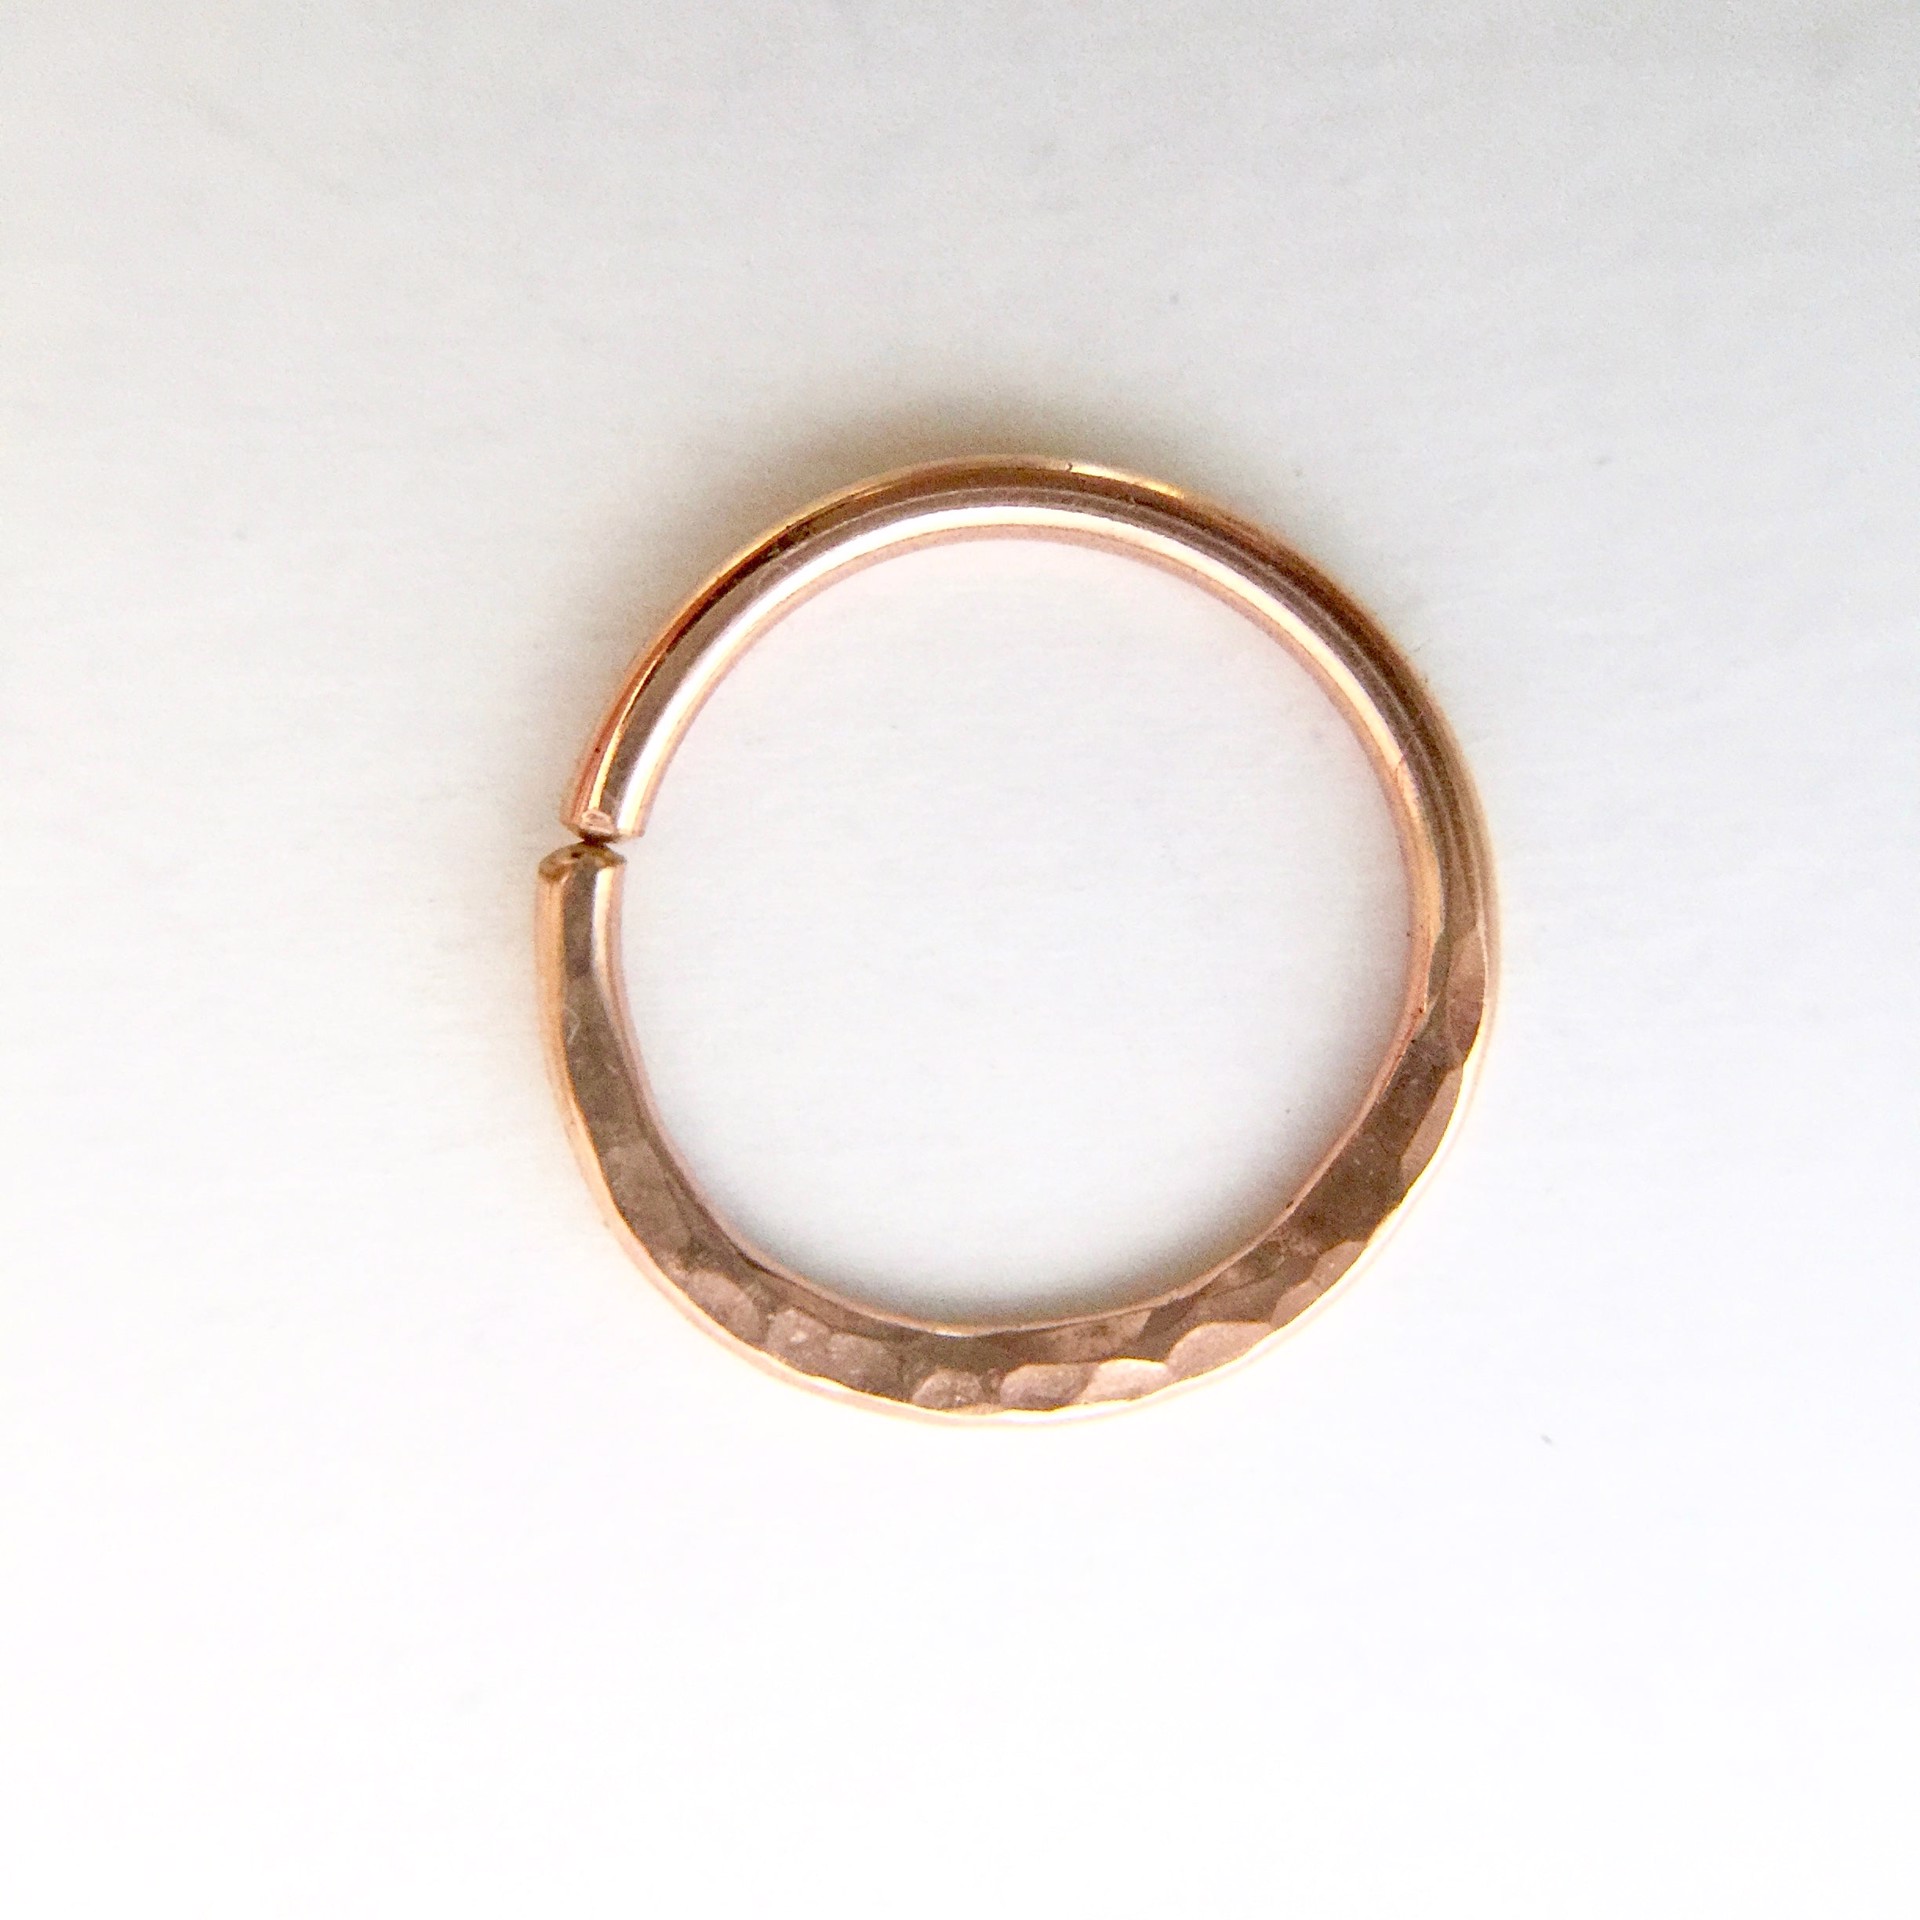 Hammered Texture Nose/Septum Ring- Rose Gold Filled - 6mm / 20 by Clementine & Co. Jewelry